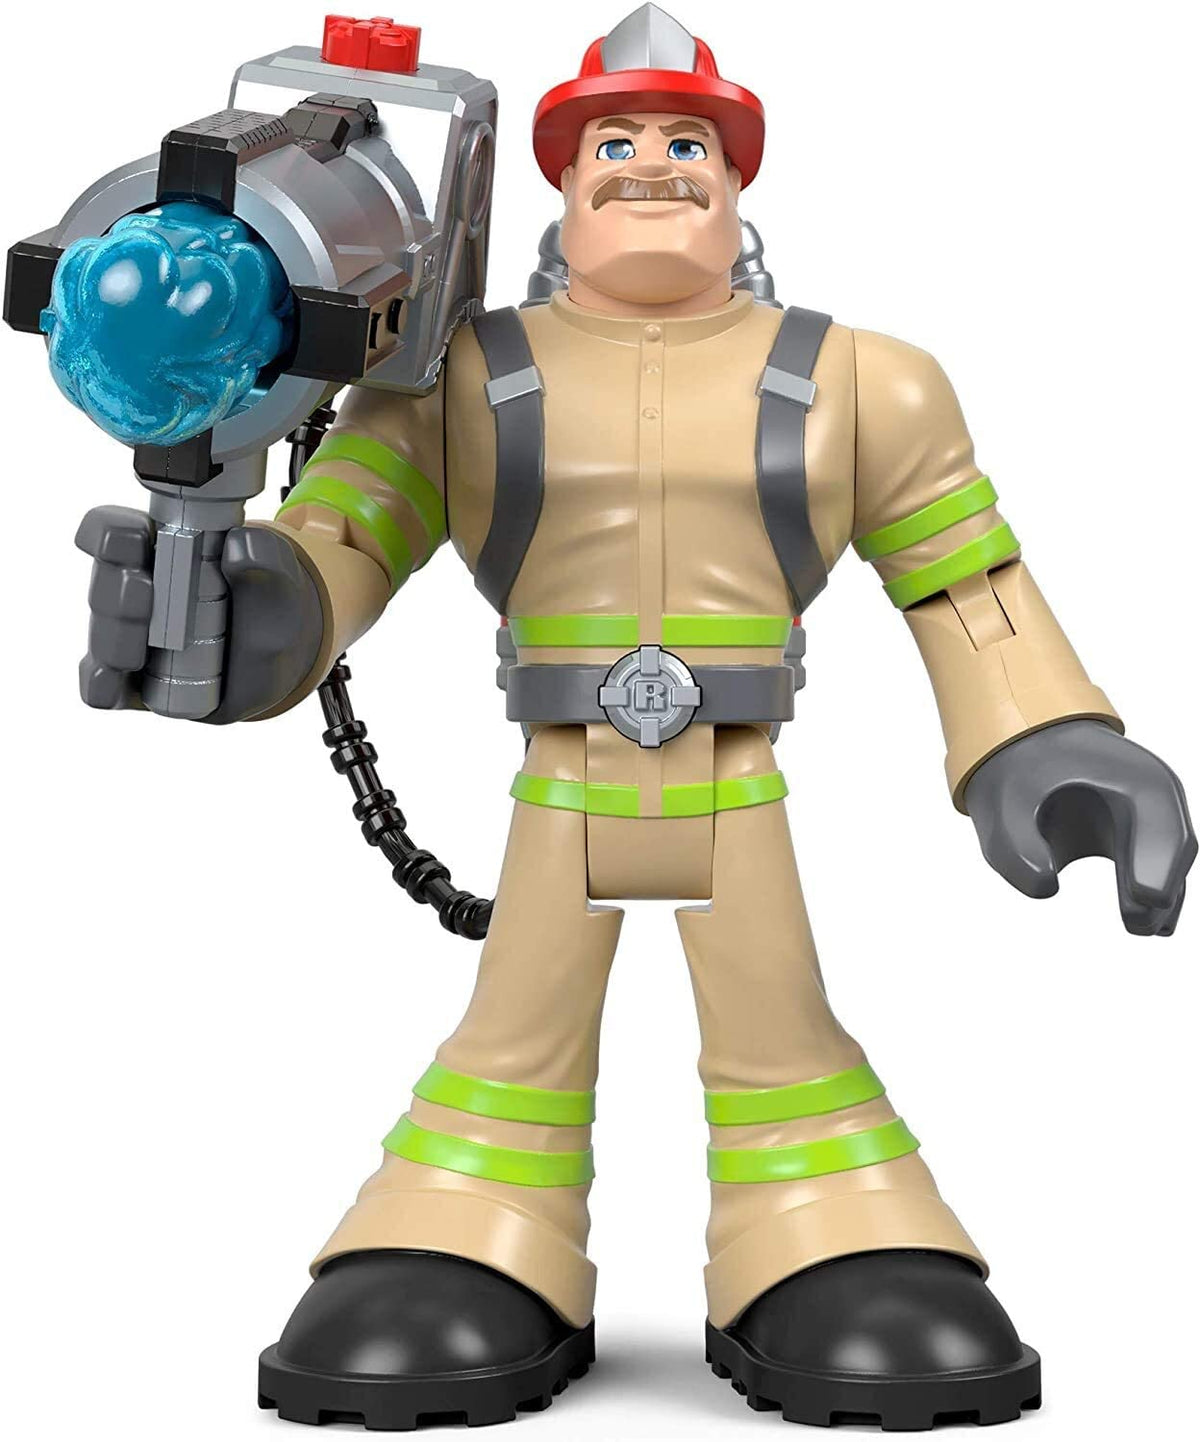 Fisher-Price Rescue Heroes Billy Blazes, 6-Inch Figure with Accessories